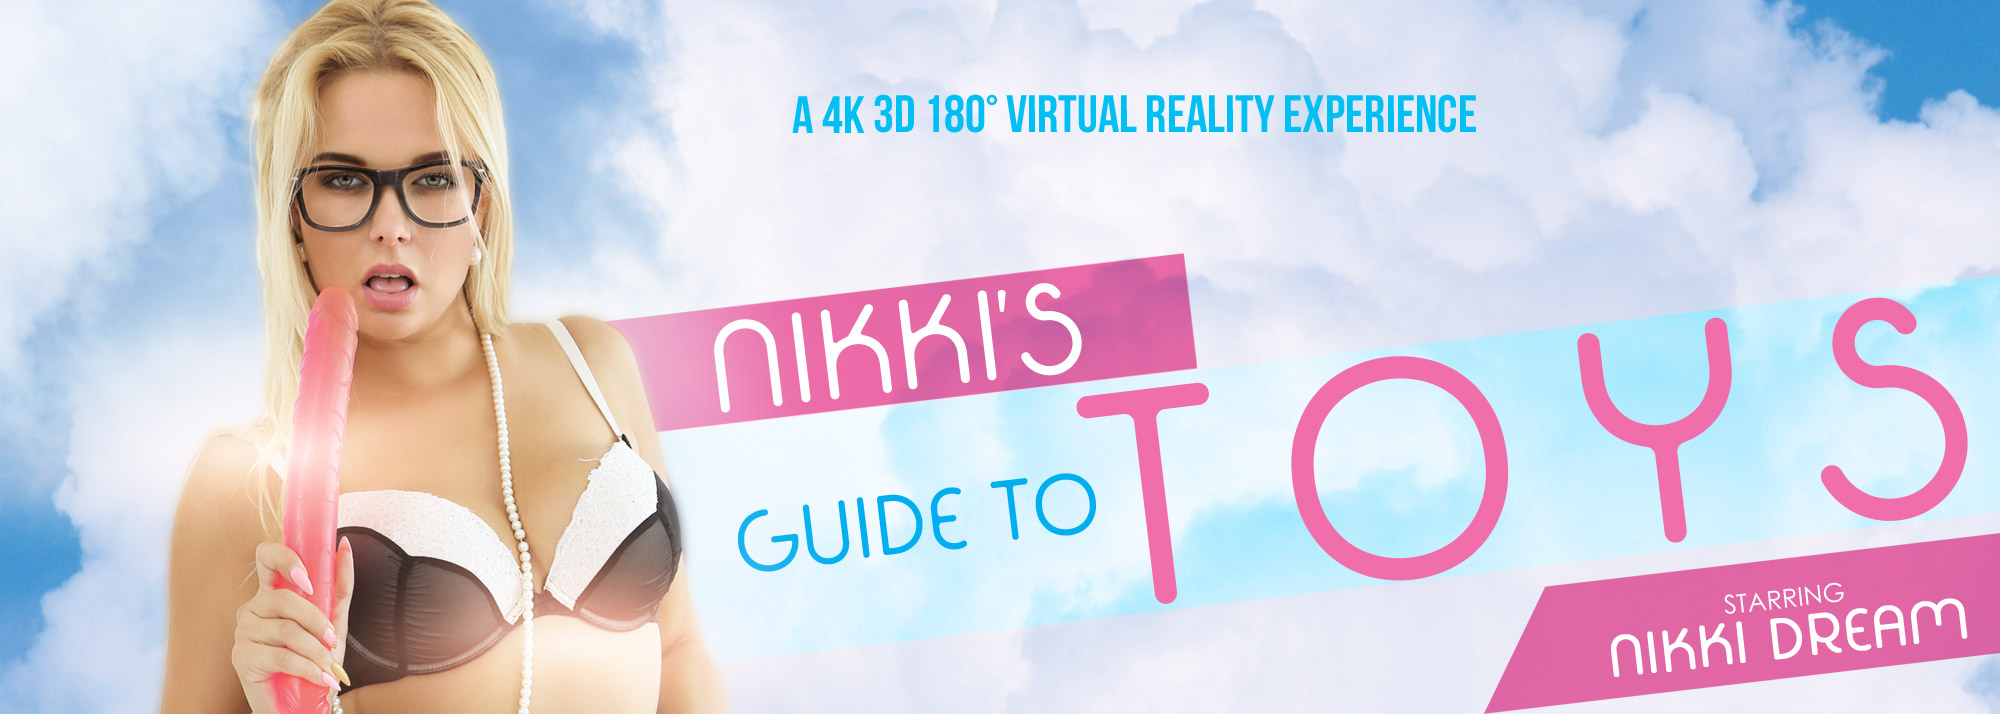 Nikky's Guide To Toys - VR Porn Video, Starring: Nikky Dream